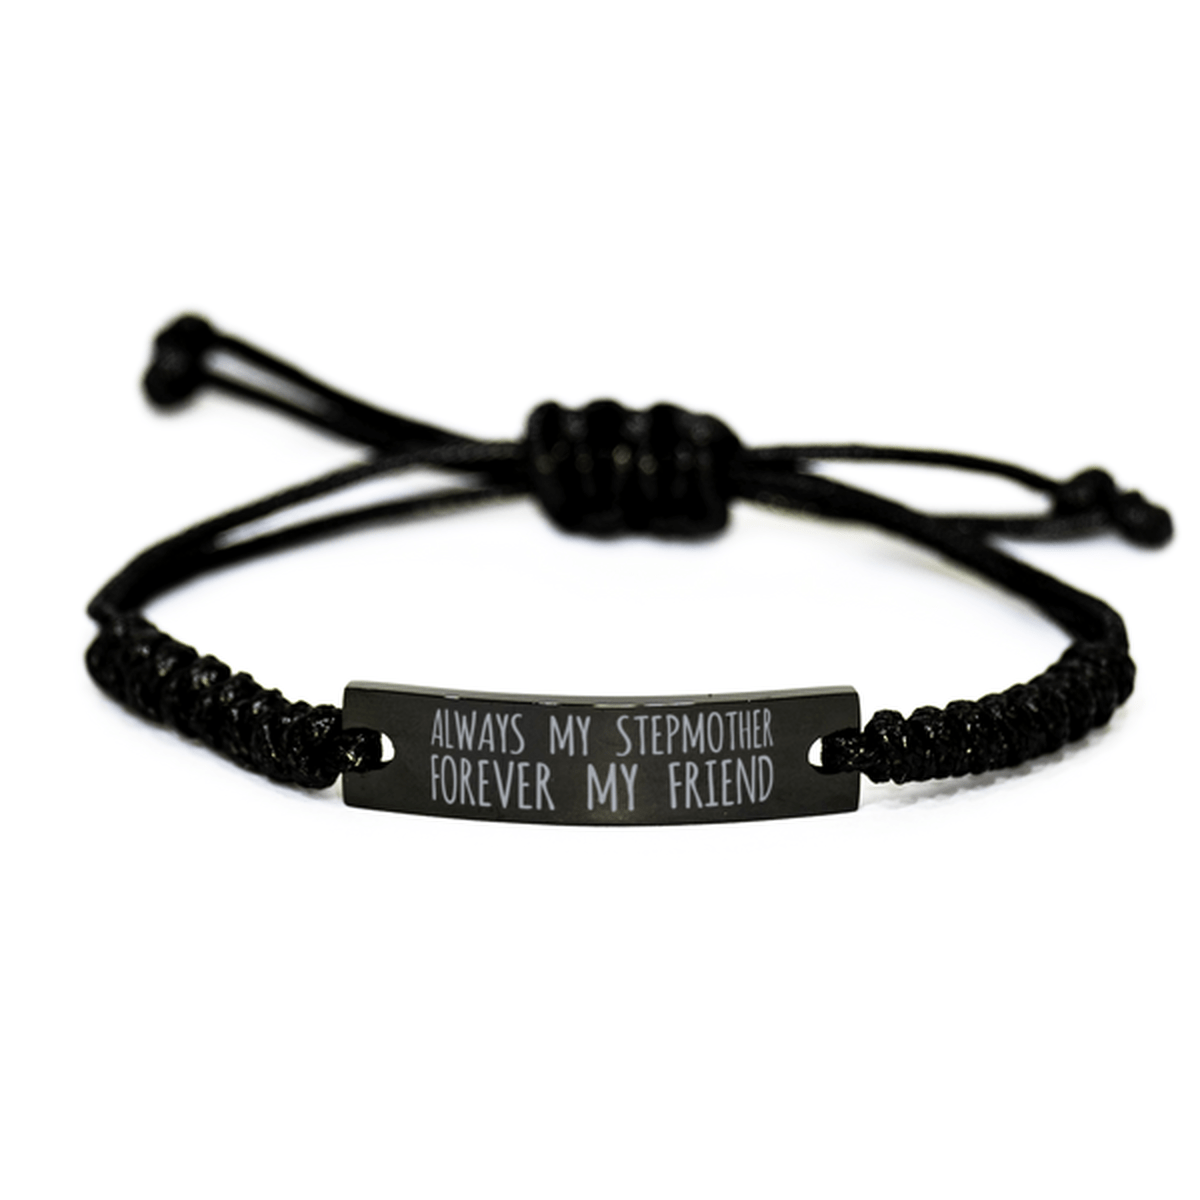 Inspirational Stepmother Black Rope Bracelet, Always My Stepmother Forever My Friend, Best Birthday Gifts For Family